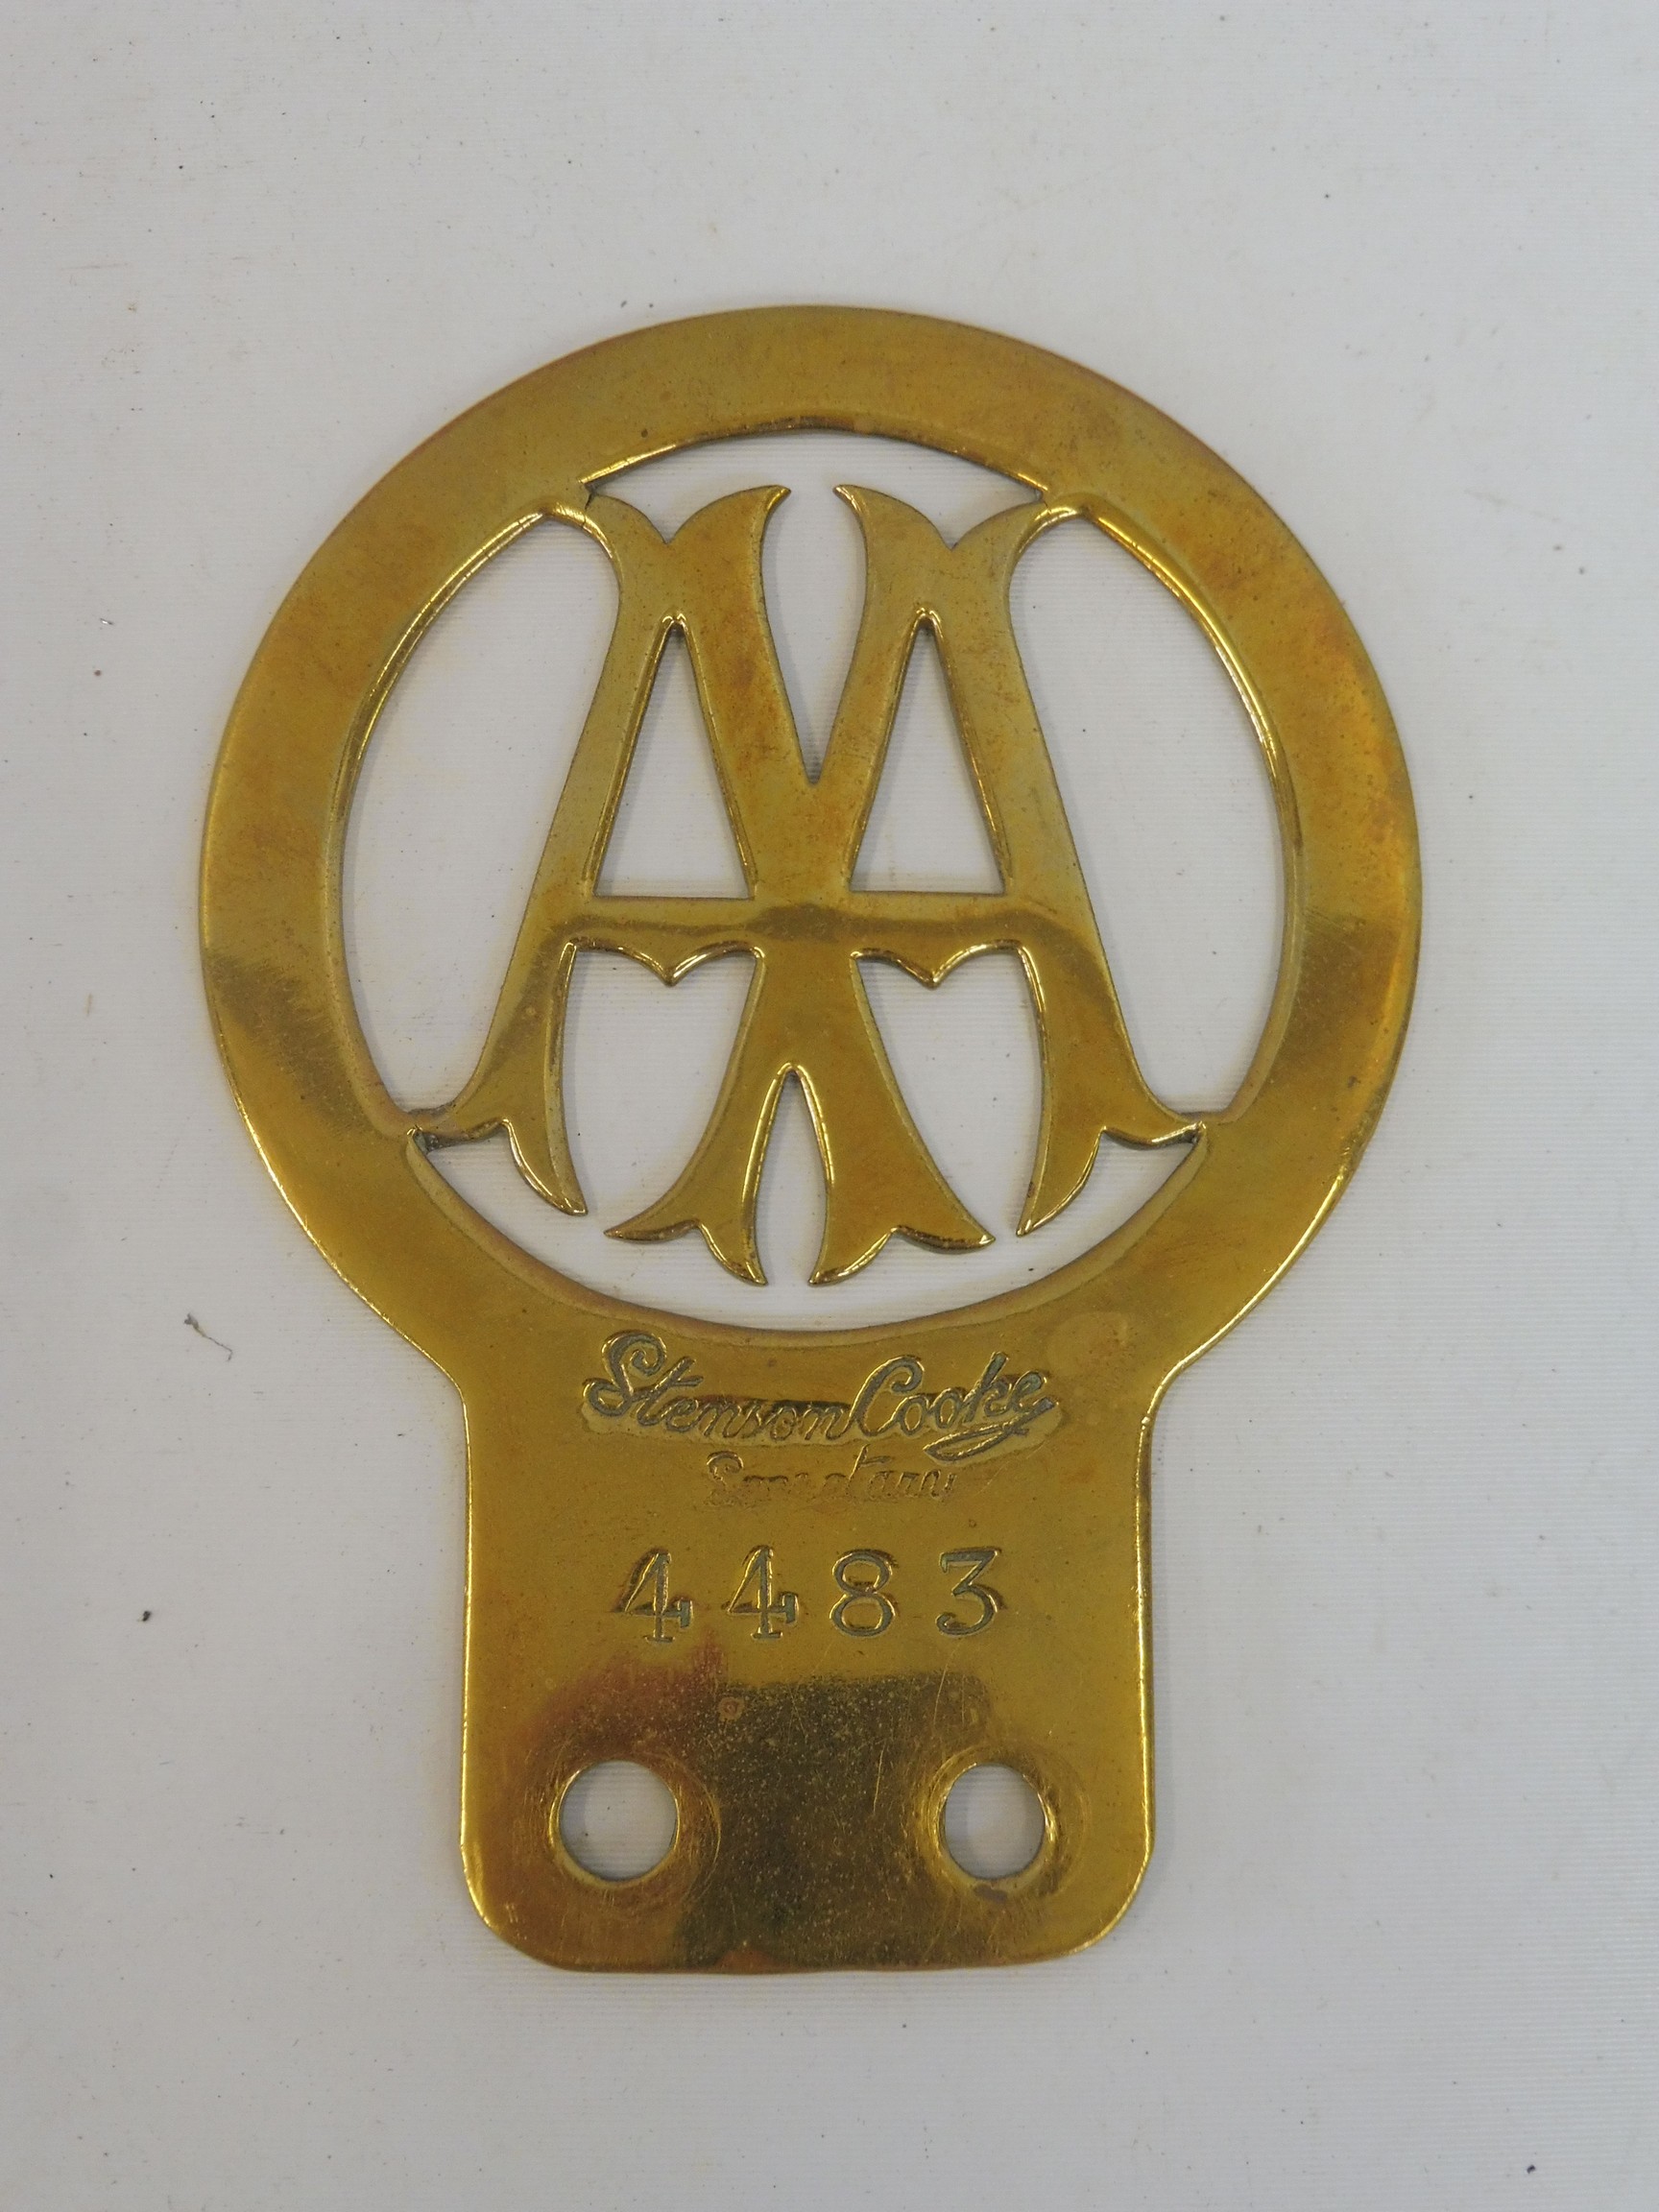 An early AA Stenson Cooke type 2A car badge, circa 1906-1908, stamped 4483.